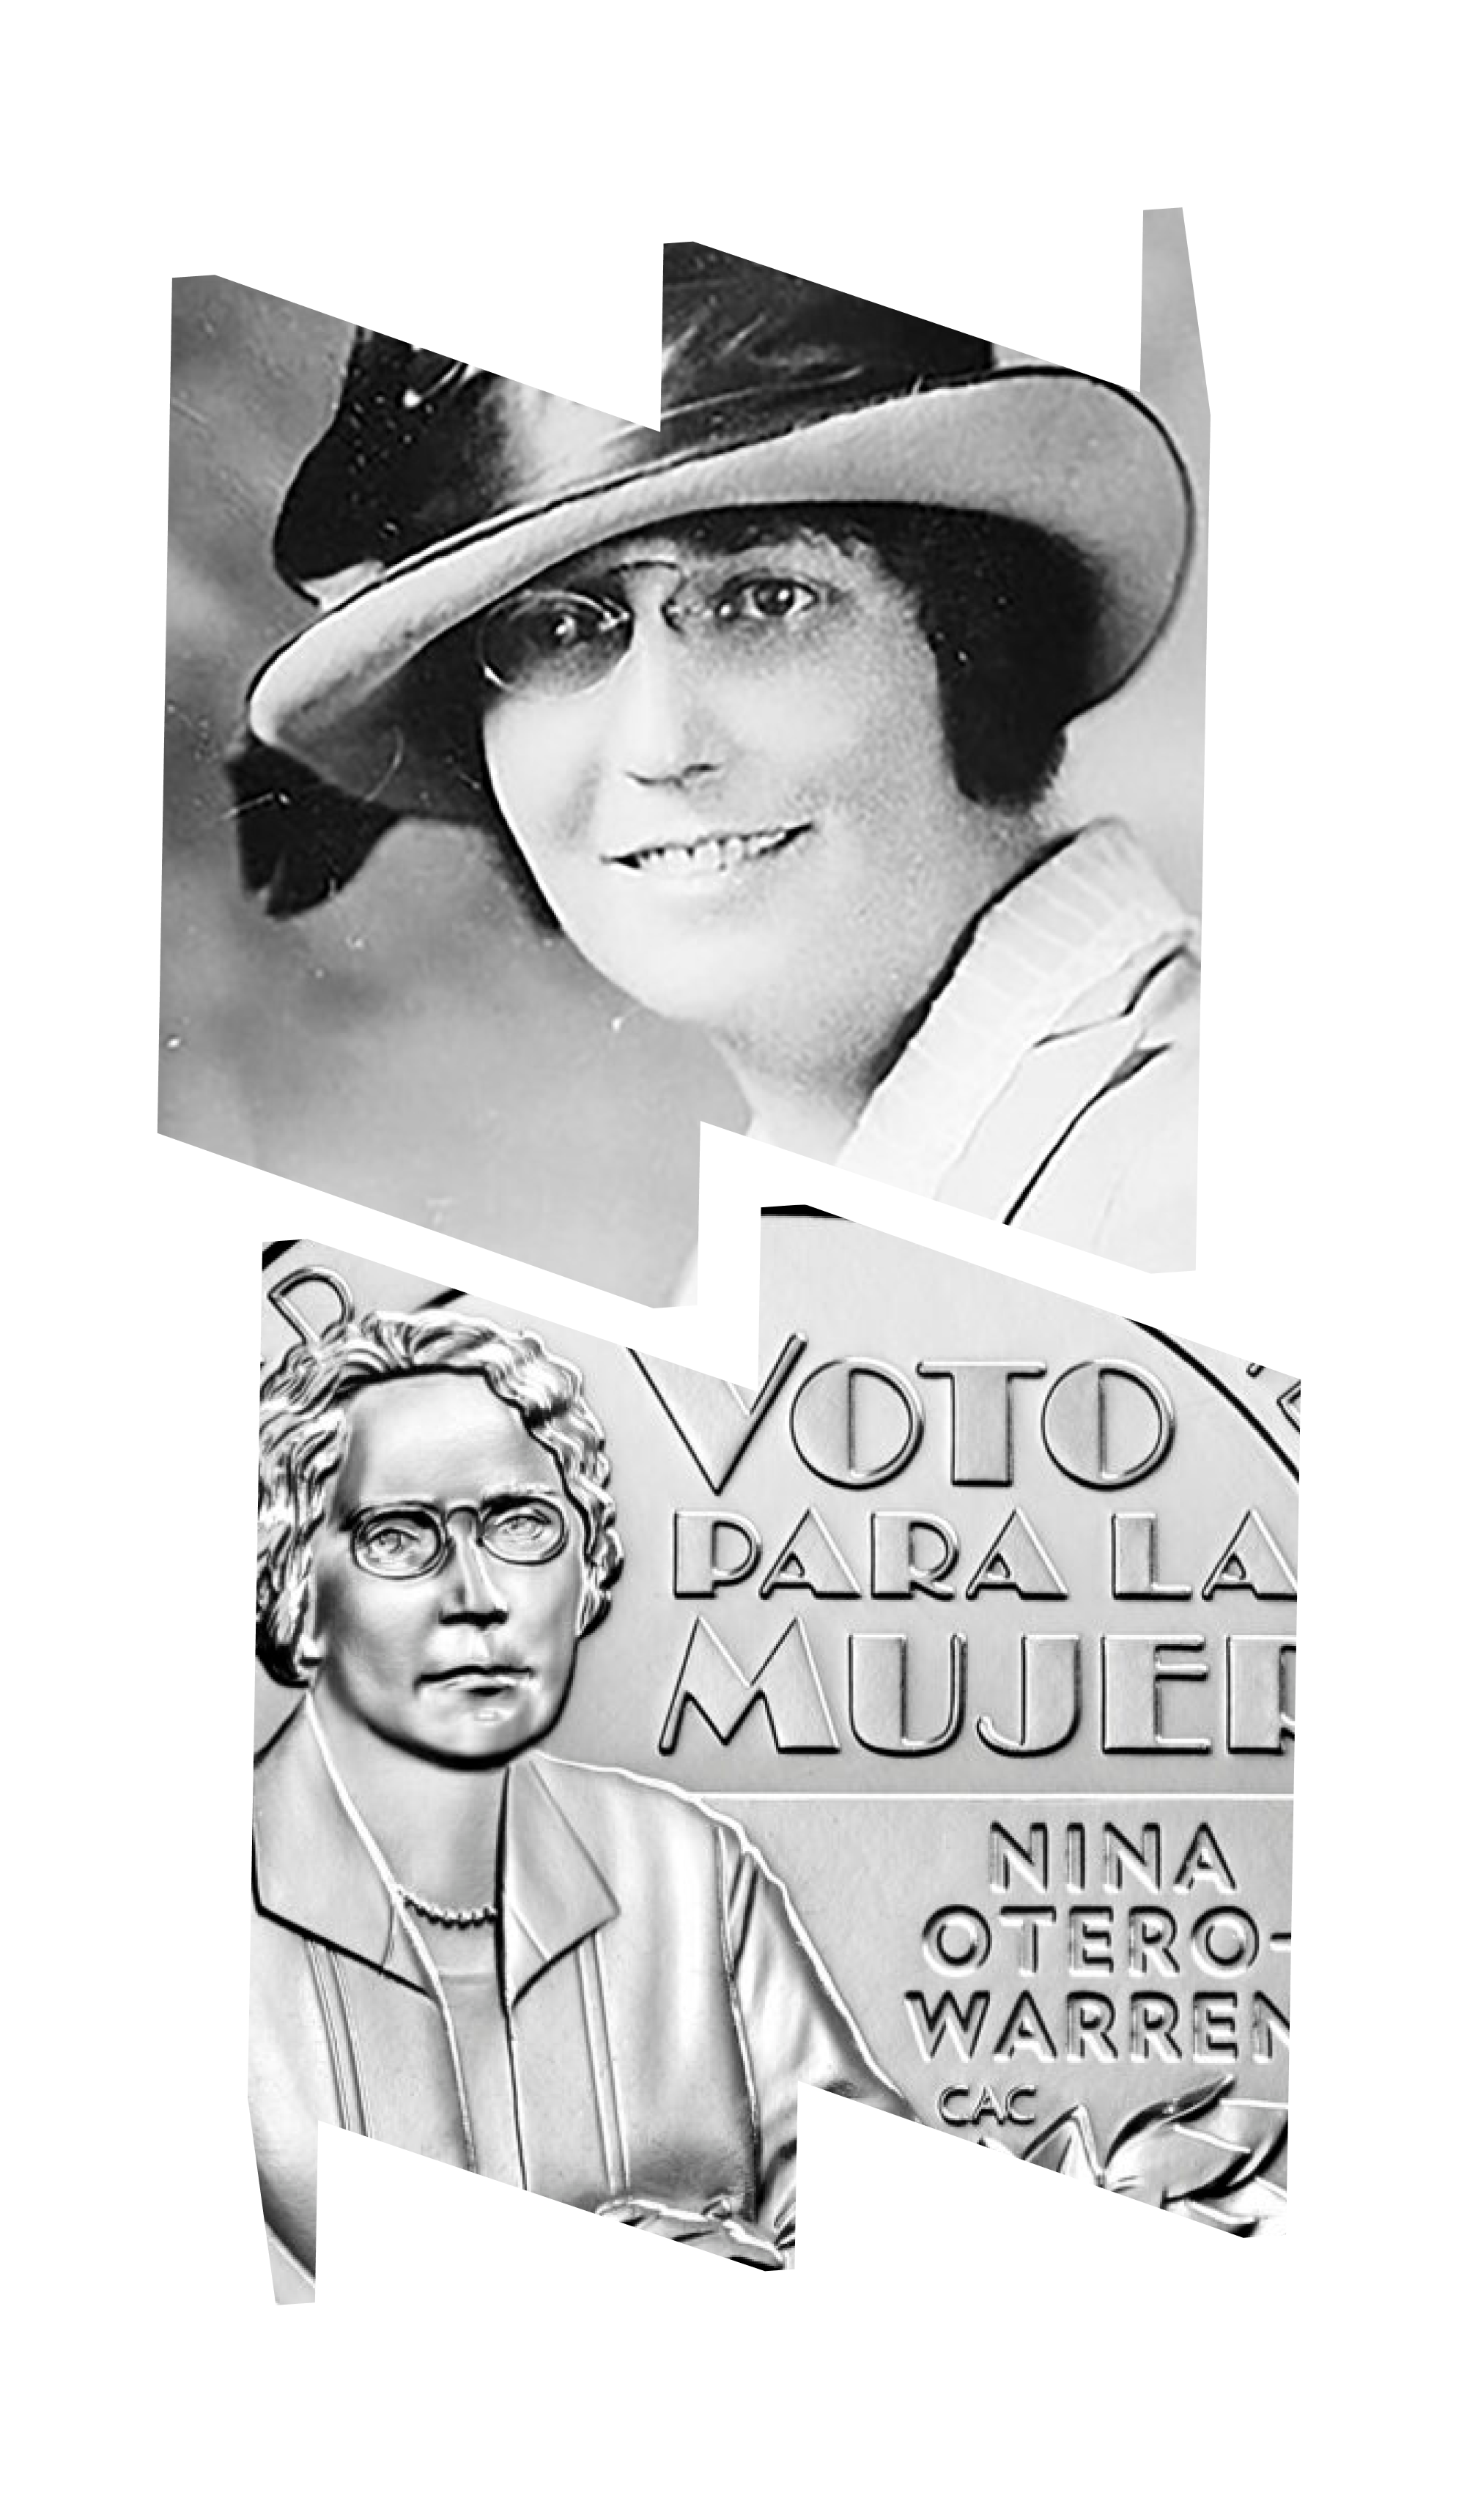 Top "W" frame shows black and white headshot of Nina Otero-Warren; bottom "M" frame showing image of quarter design featuring Otero-Warren seated with words "Voto Para La Mujer" and her name.